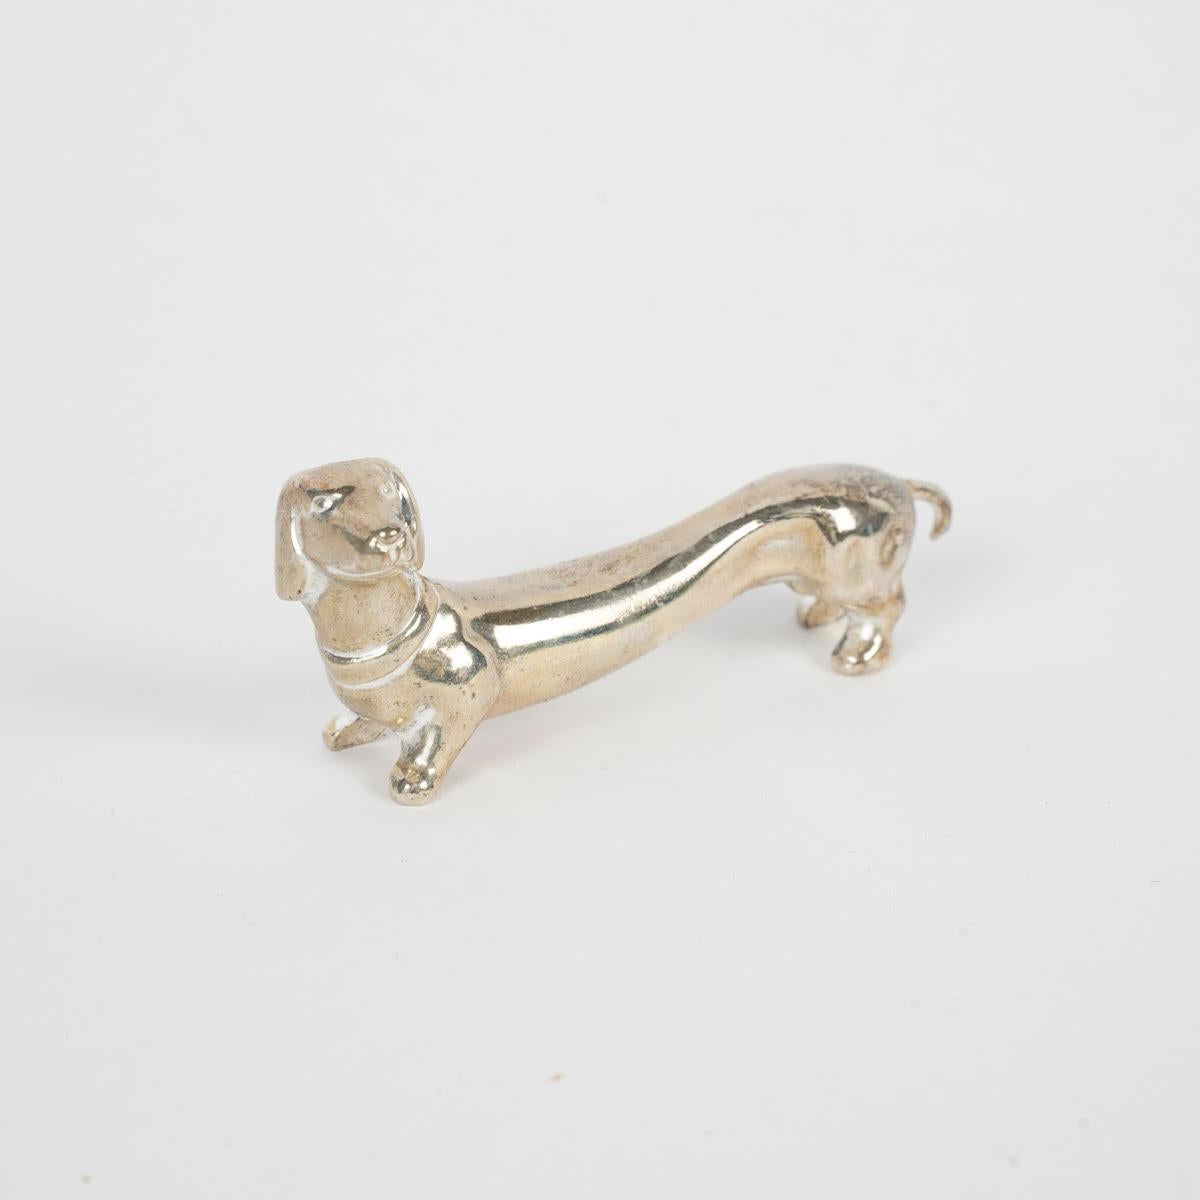 Suite of 12 silver-plated dog-shaped knife rests, 1980.

Suite of 12 silver-plated dog-shaped knife rests from the 1980s, in their boxes.
Box: H: 3cm, W: 7cm, D: 1.5cm